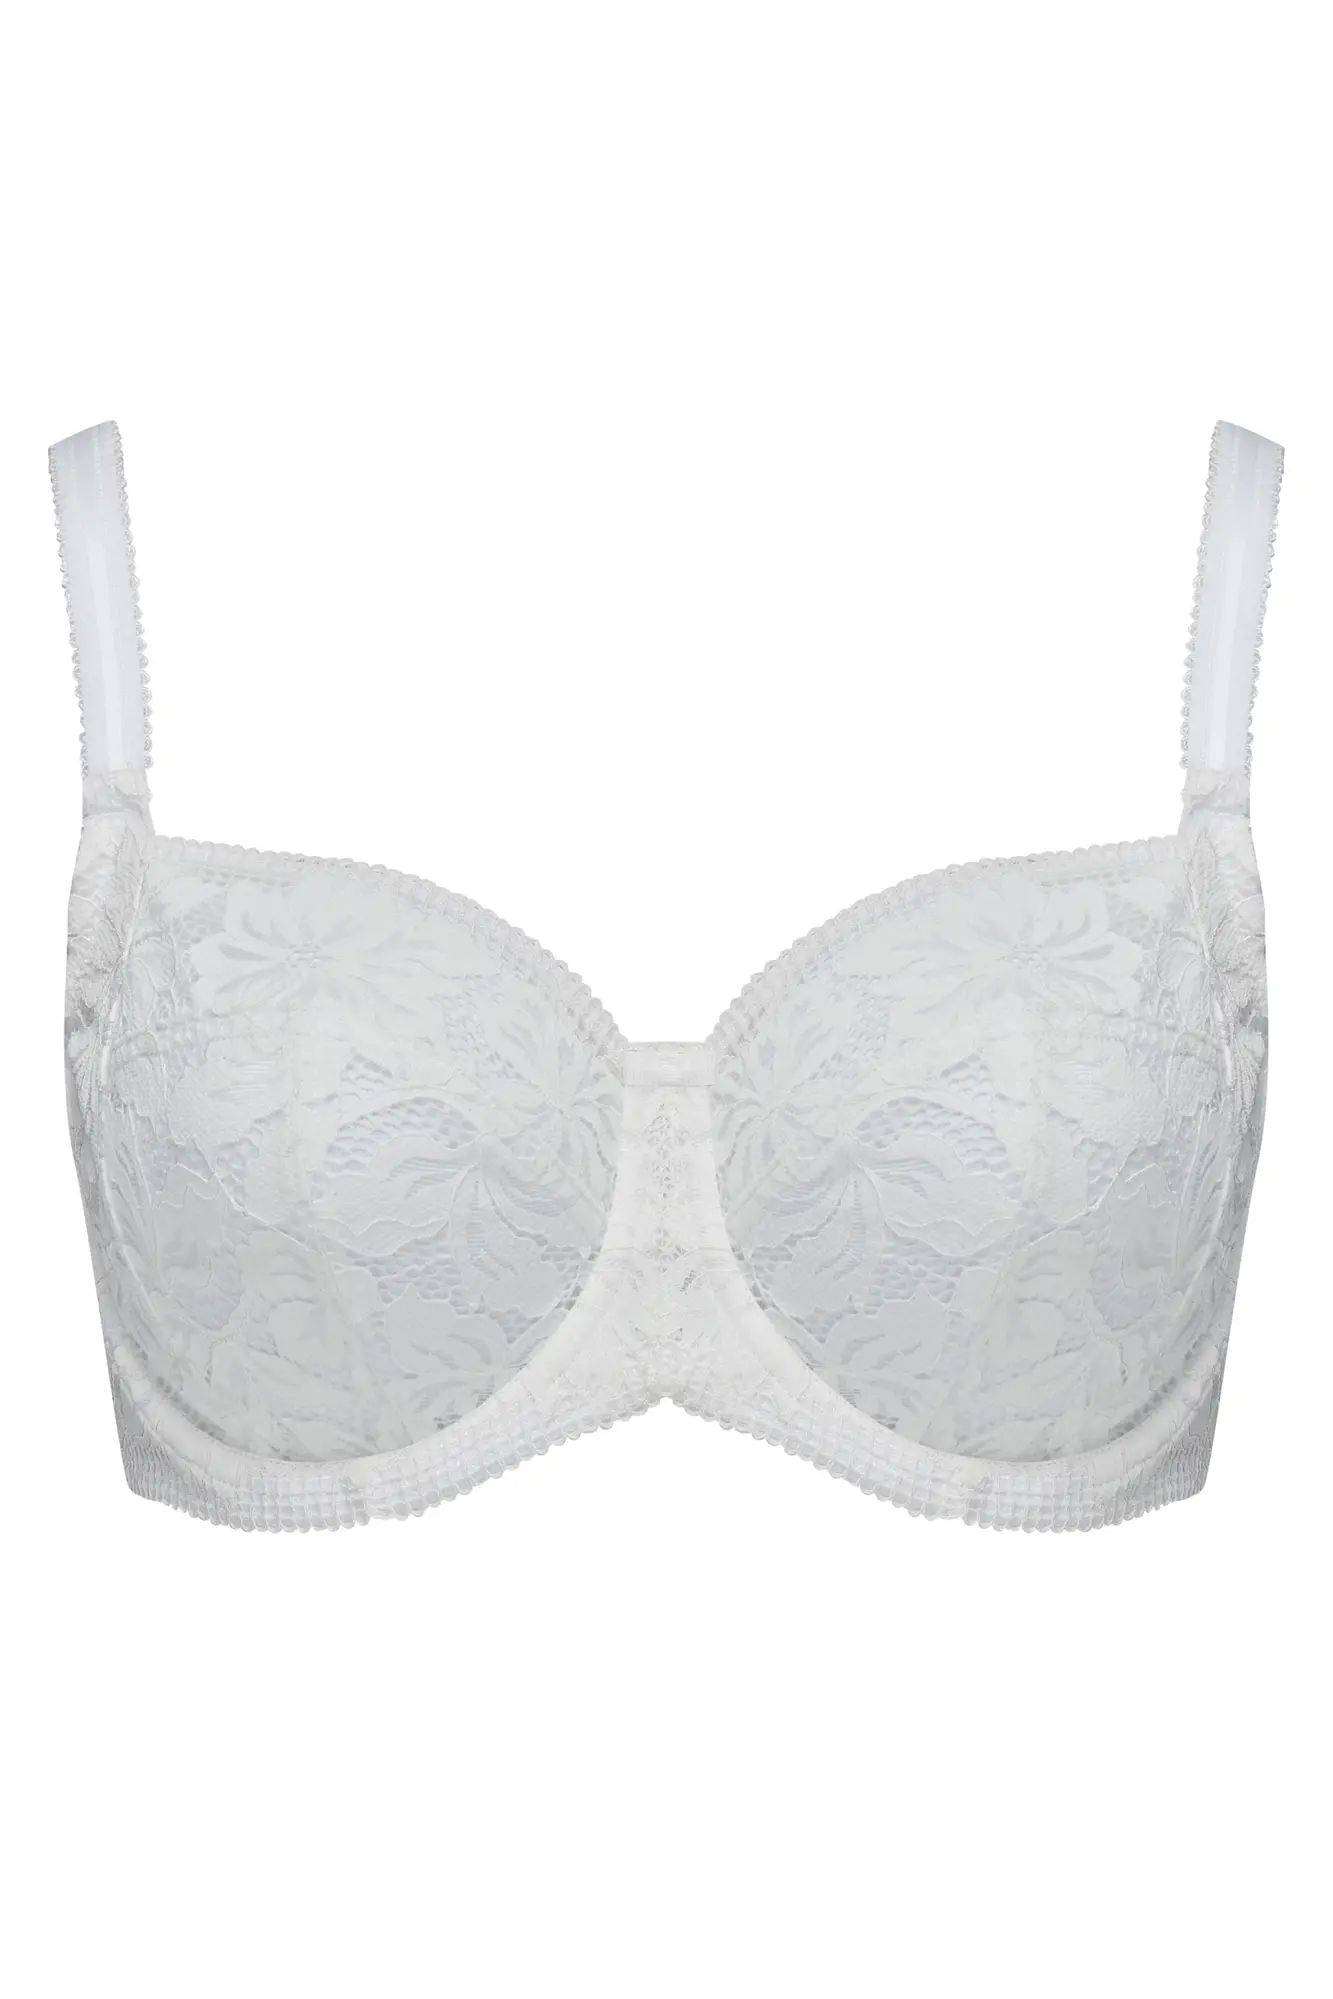 Reflection Side Support Bra | White | Pour Moi